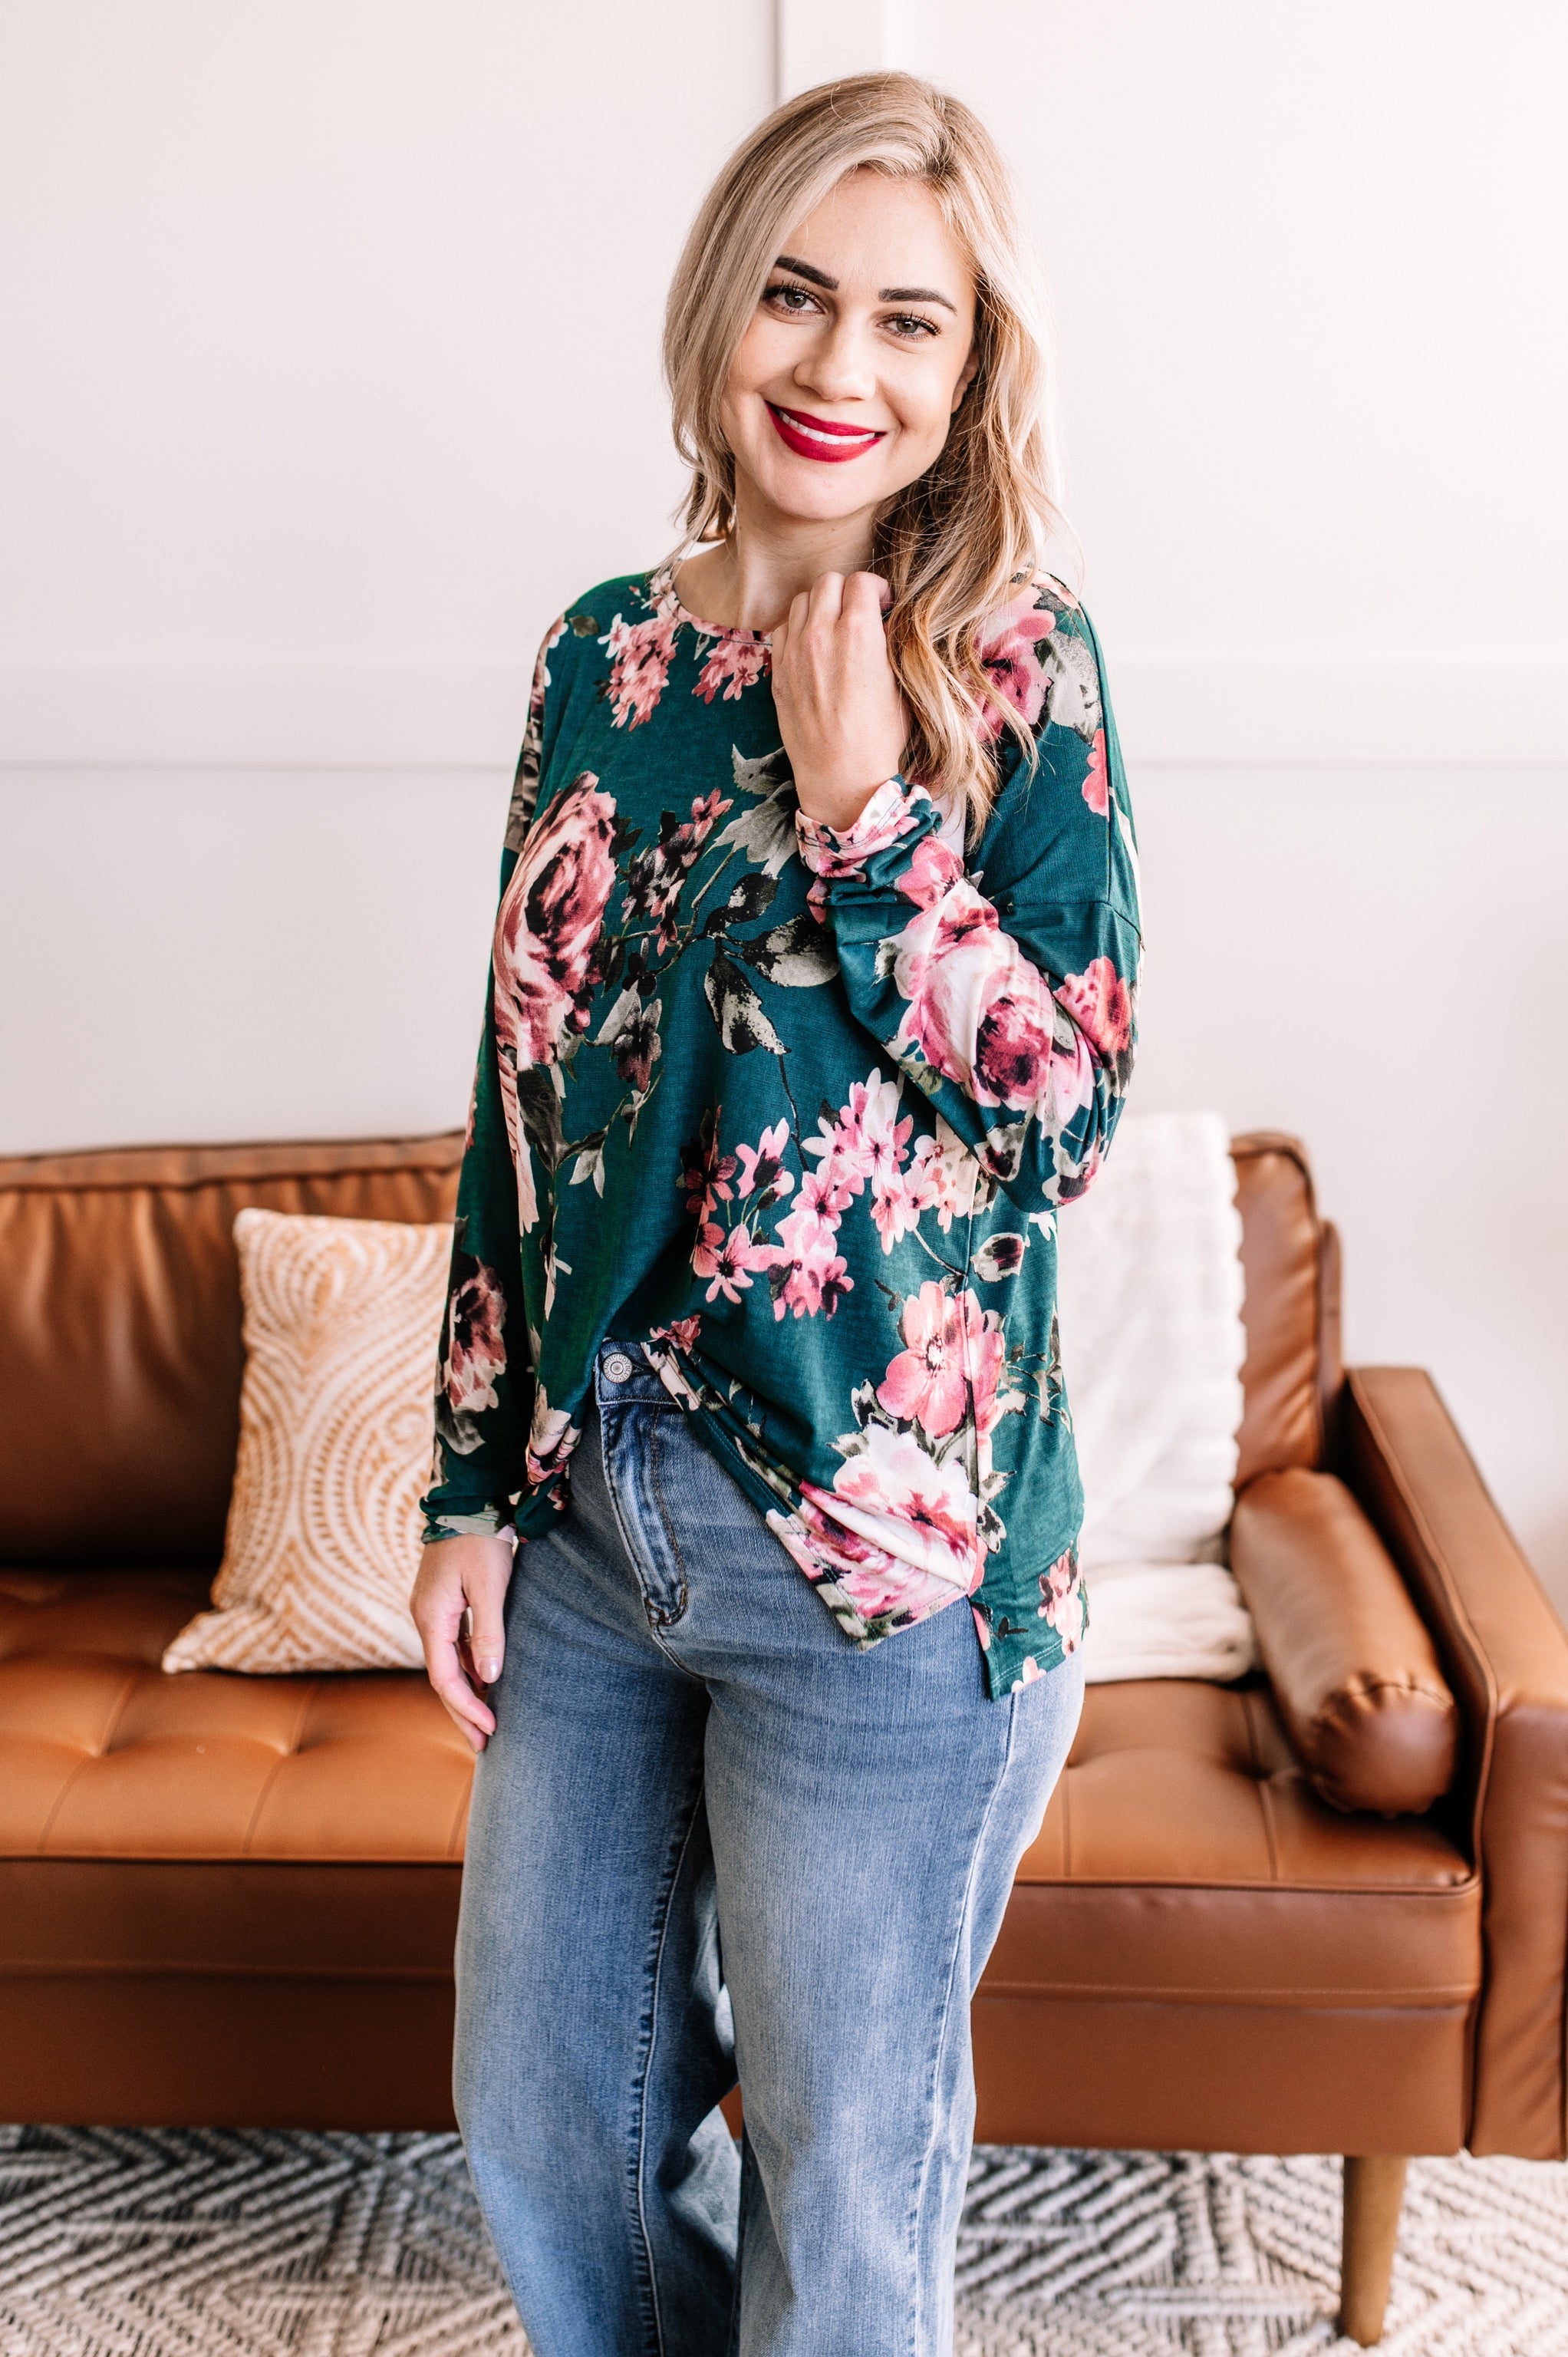 Cross Reference Floral Top In Teal & Mauve